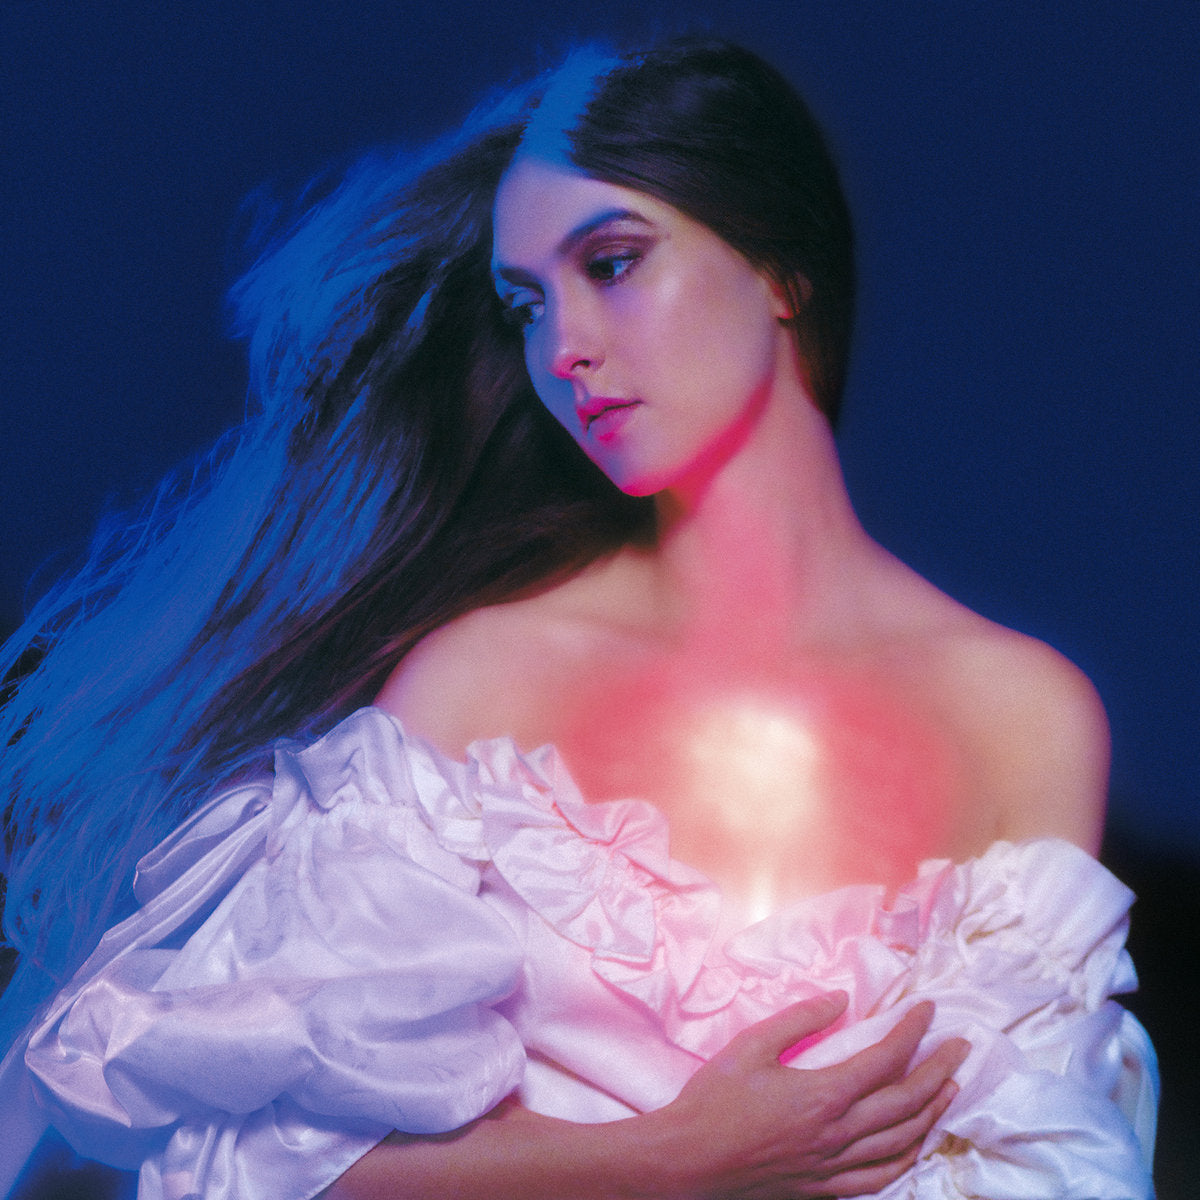 Weyes Blood - And In the Darkness Hearts Aglow (Vinyl LP)